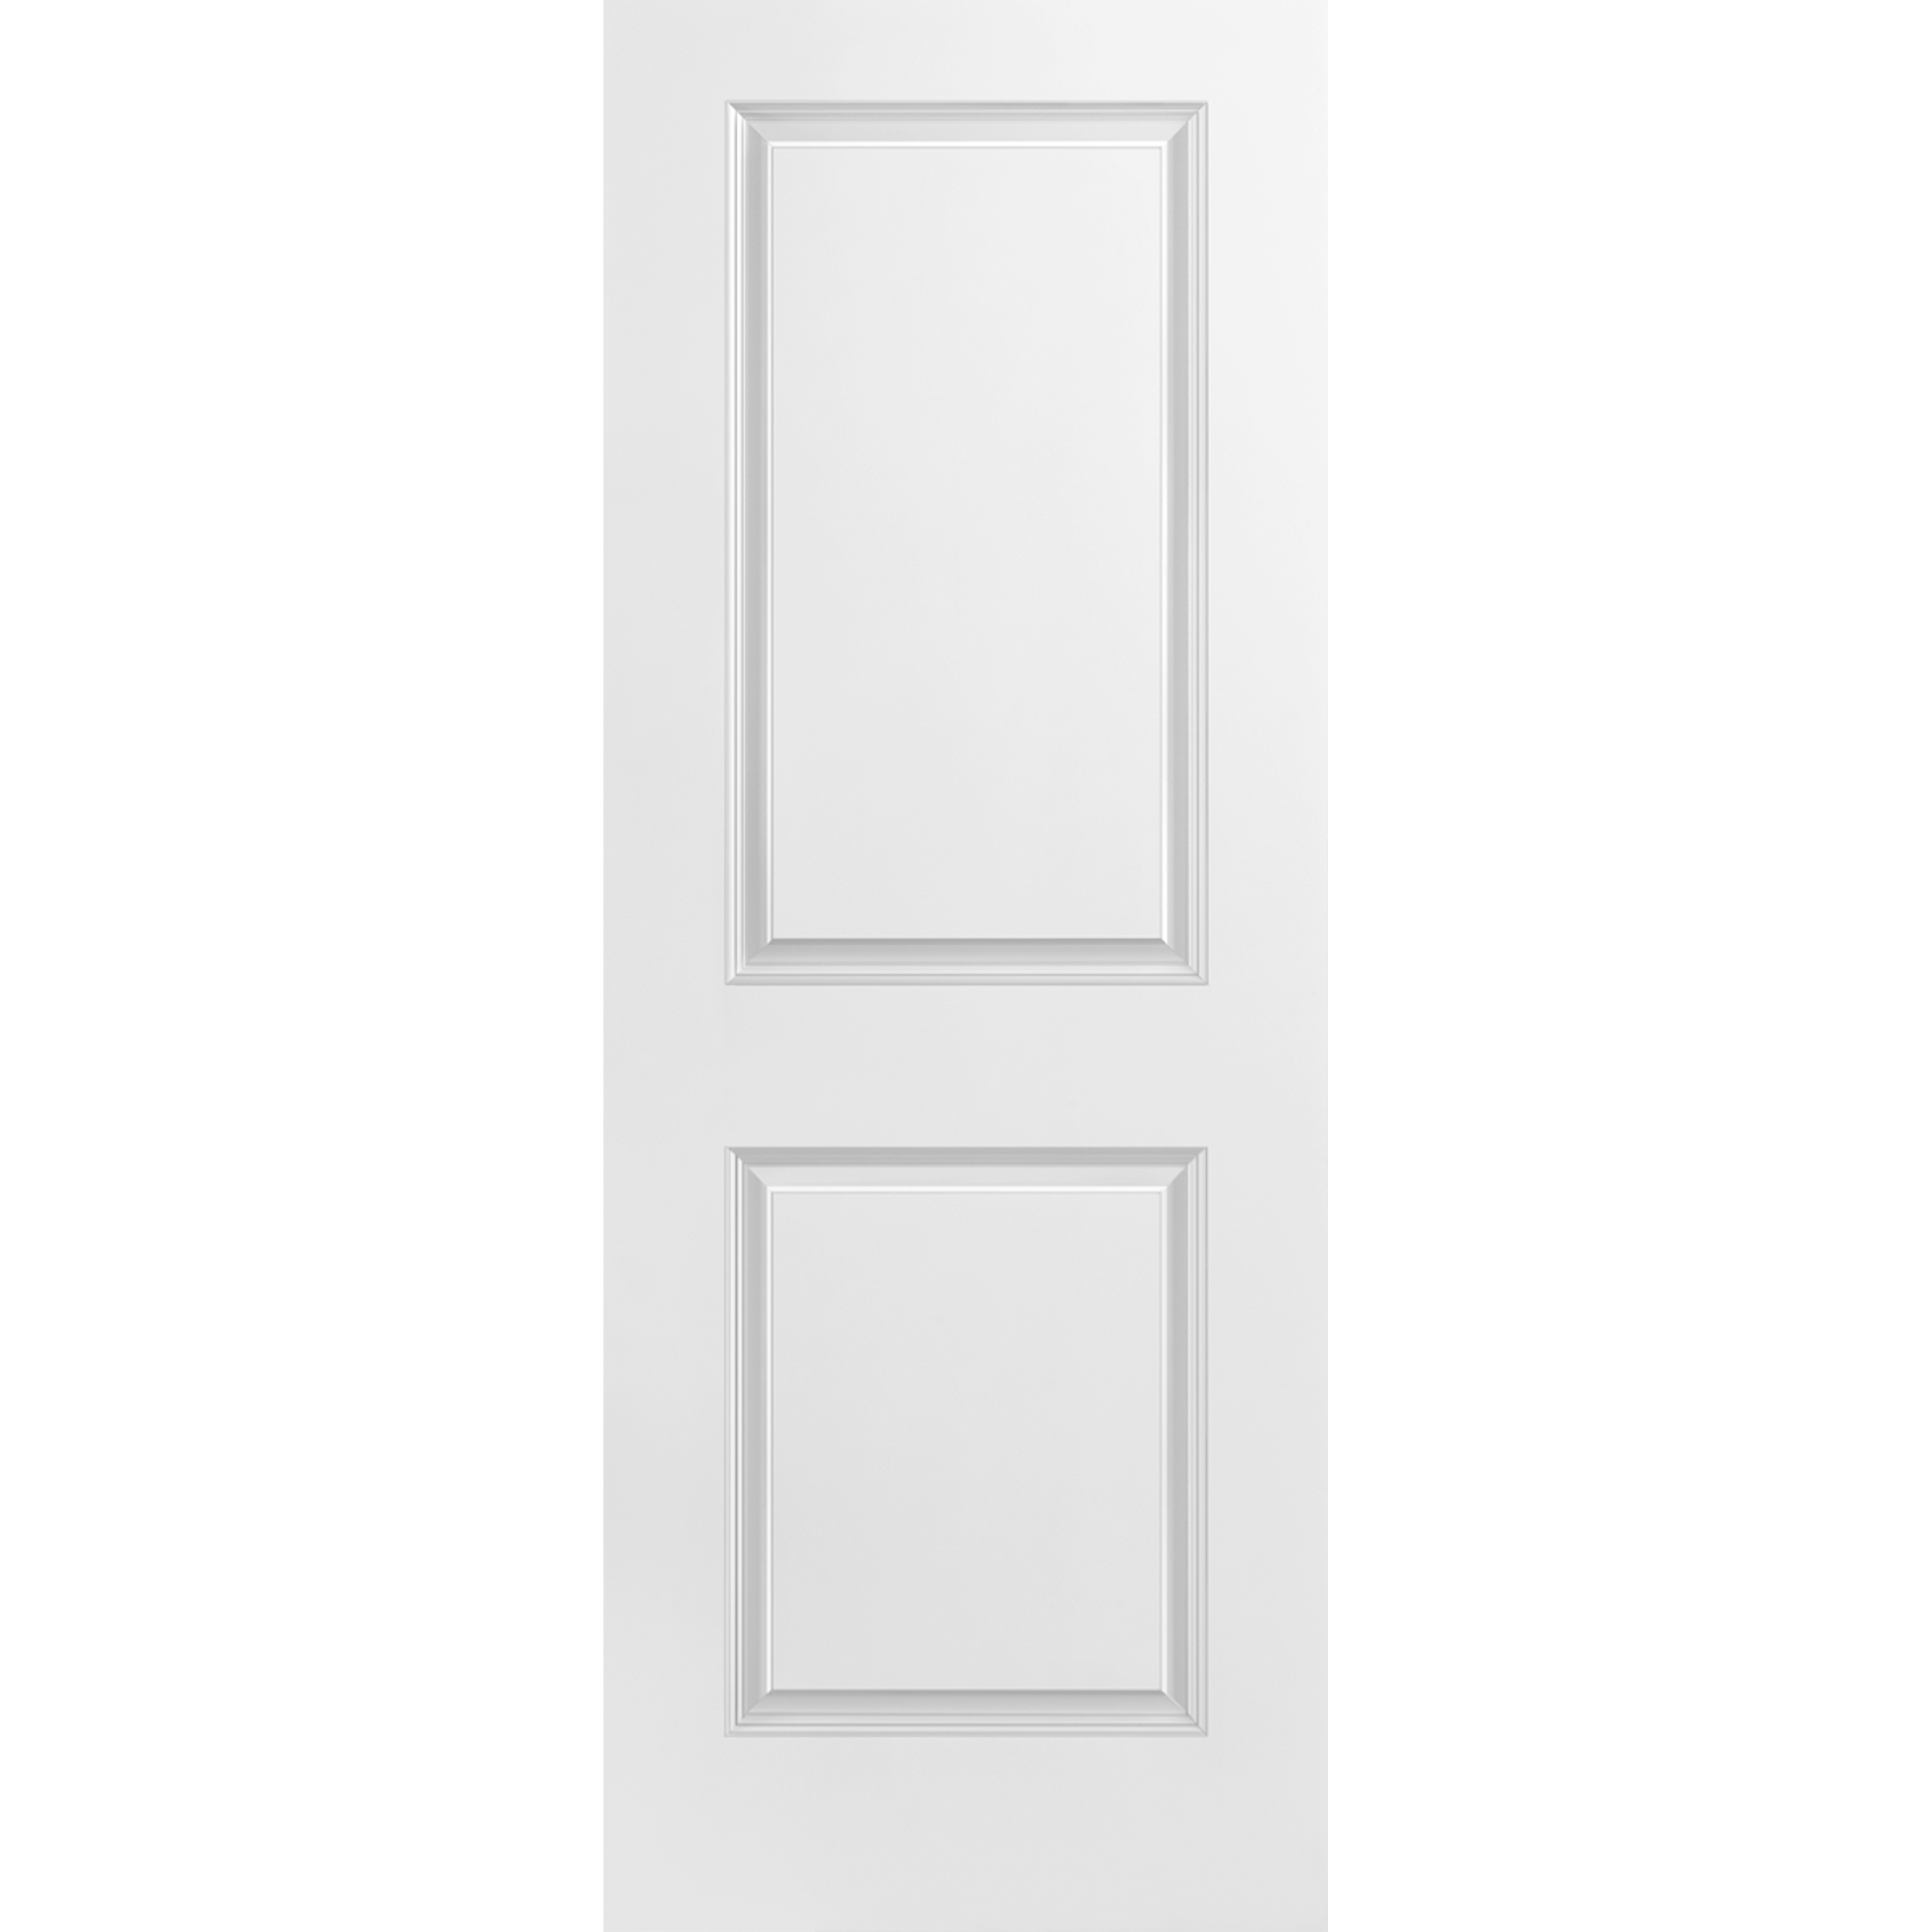 26x80 2 Panel Square Smooth Moulded Fast Fit Door with 4-5/8" PFJ Jamb